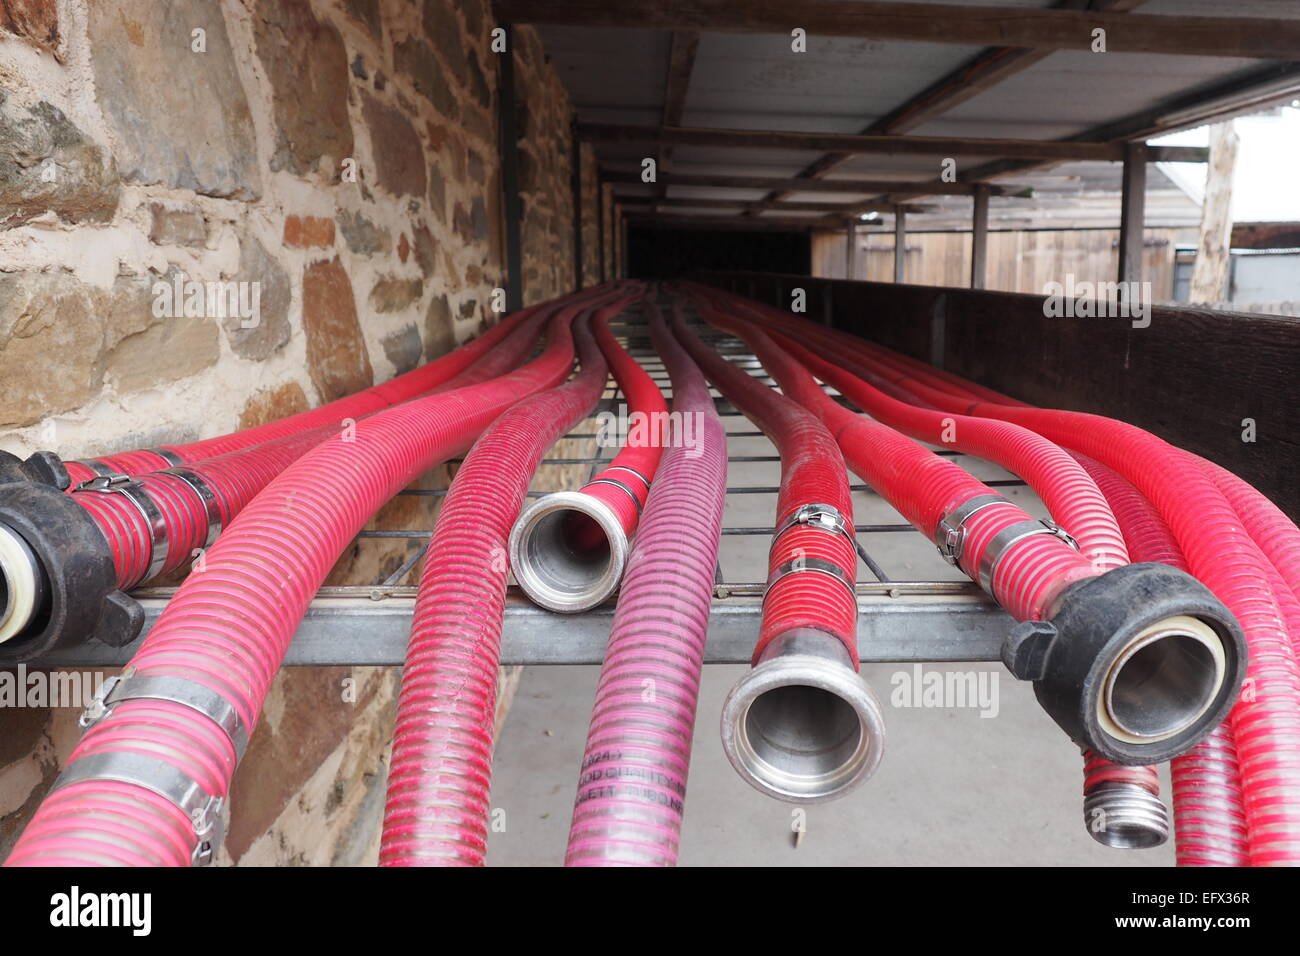 Red hose used in the making of wine Stock Photo - Alamy